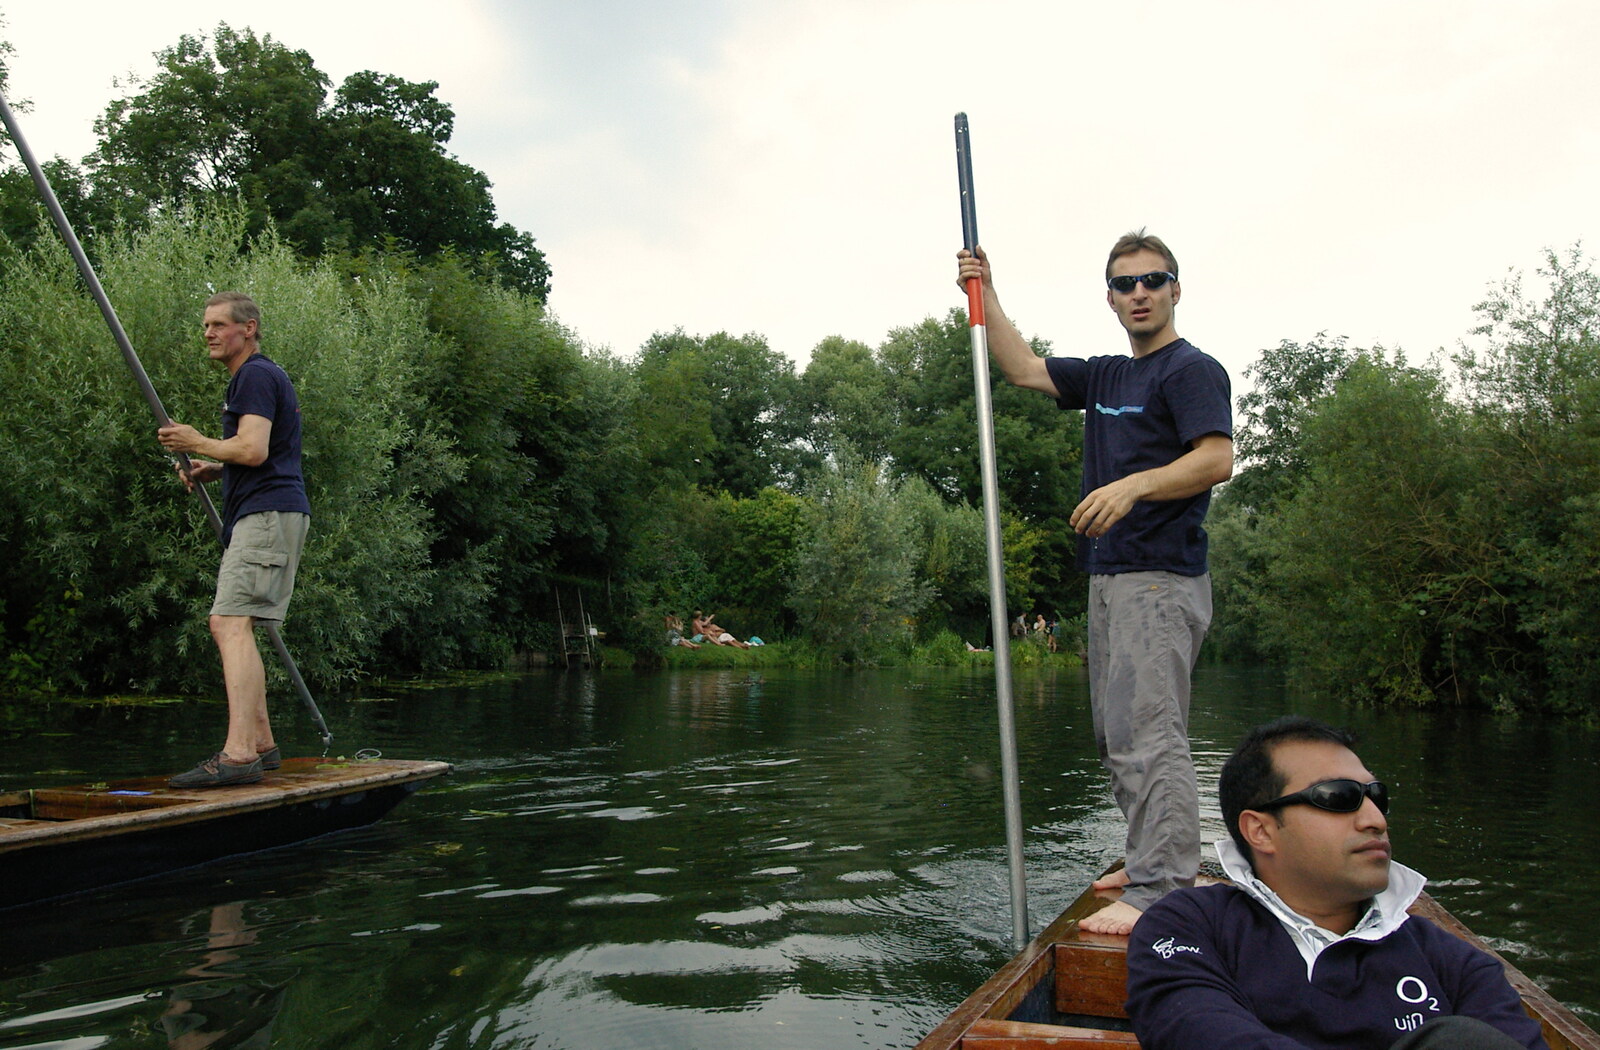 Tim and Ben from Qualcomm goes Punting on the Cam, Grantchester Meadows, Cambridge - 18th August 2005